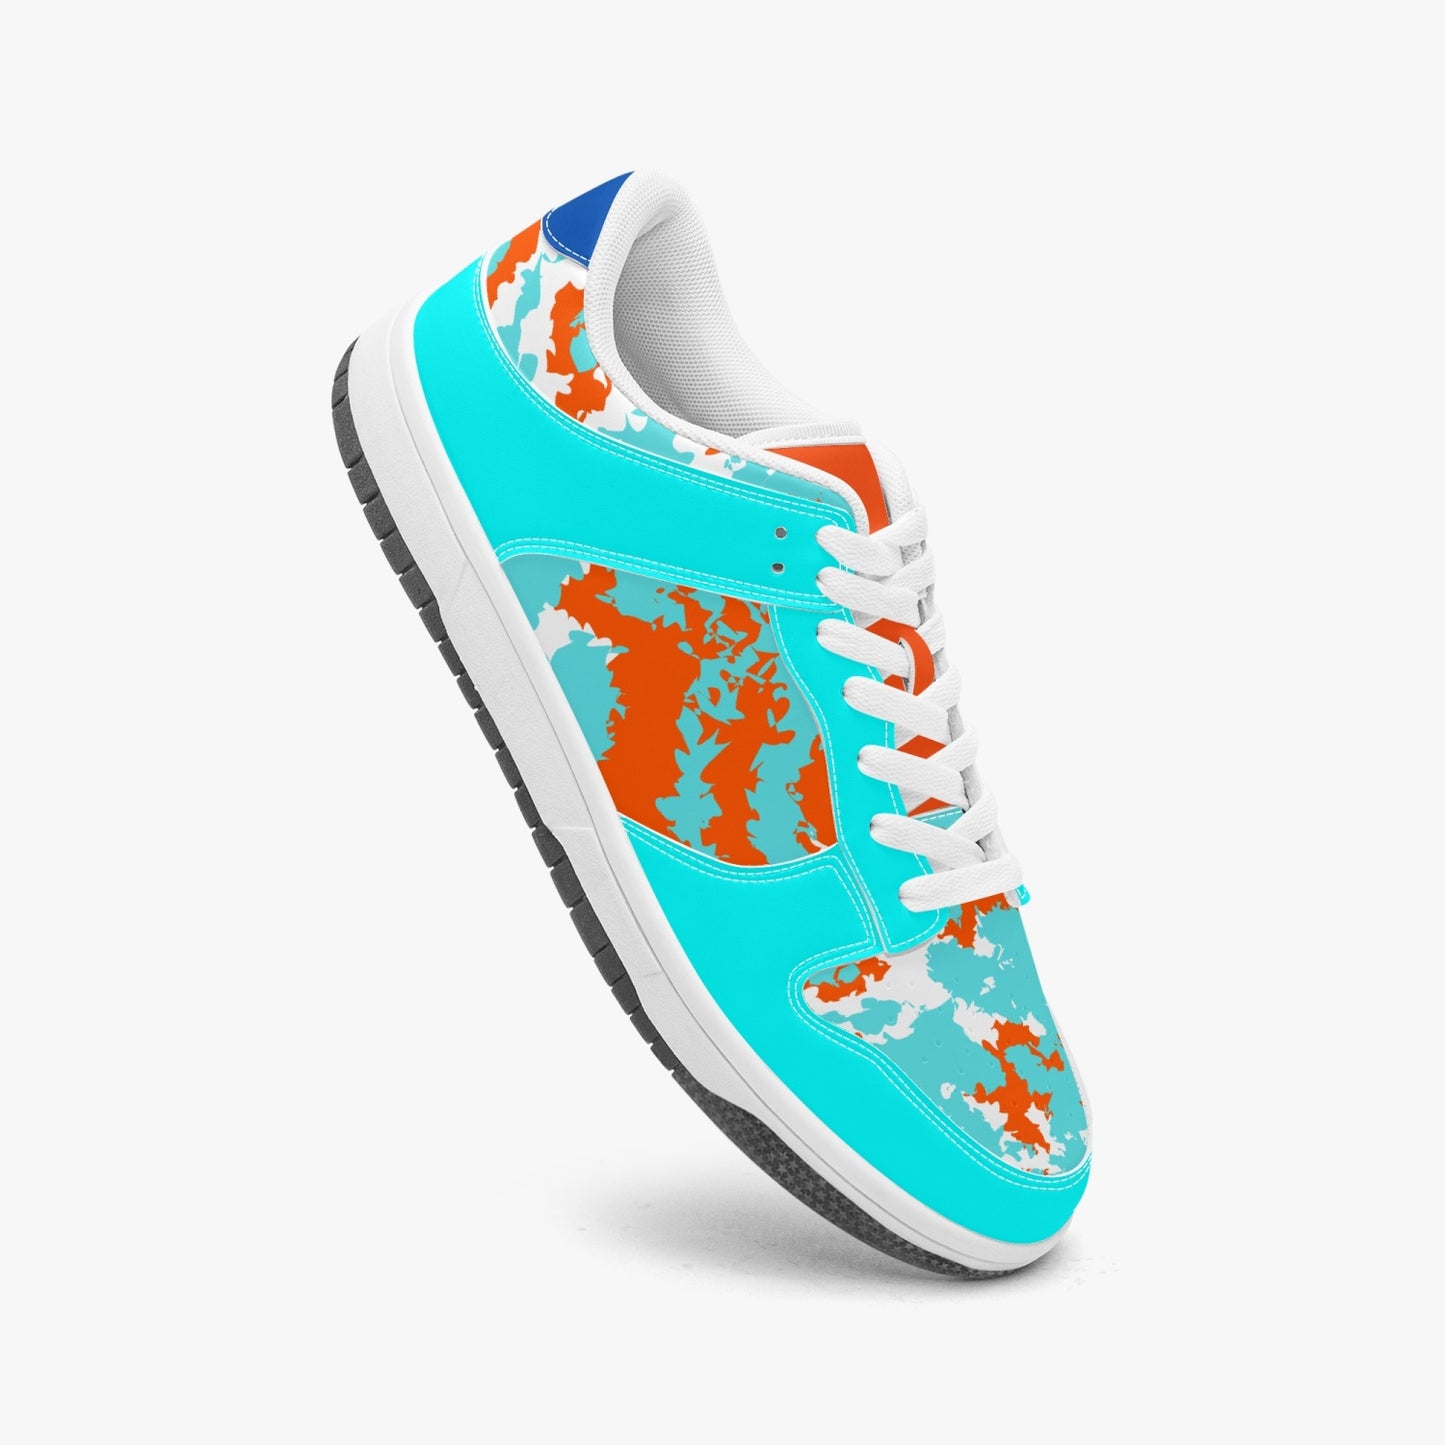 Kicxs Dolphins Low-Top Leather Sneakers